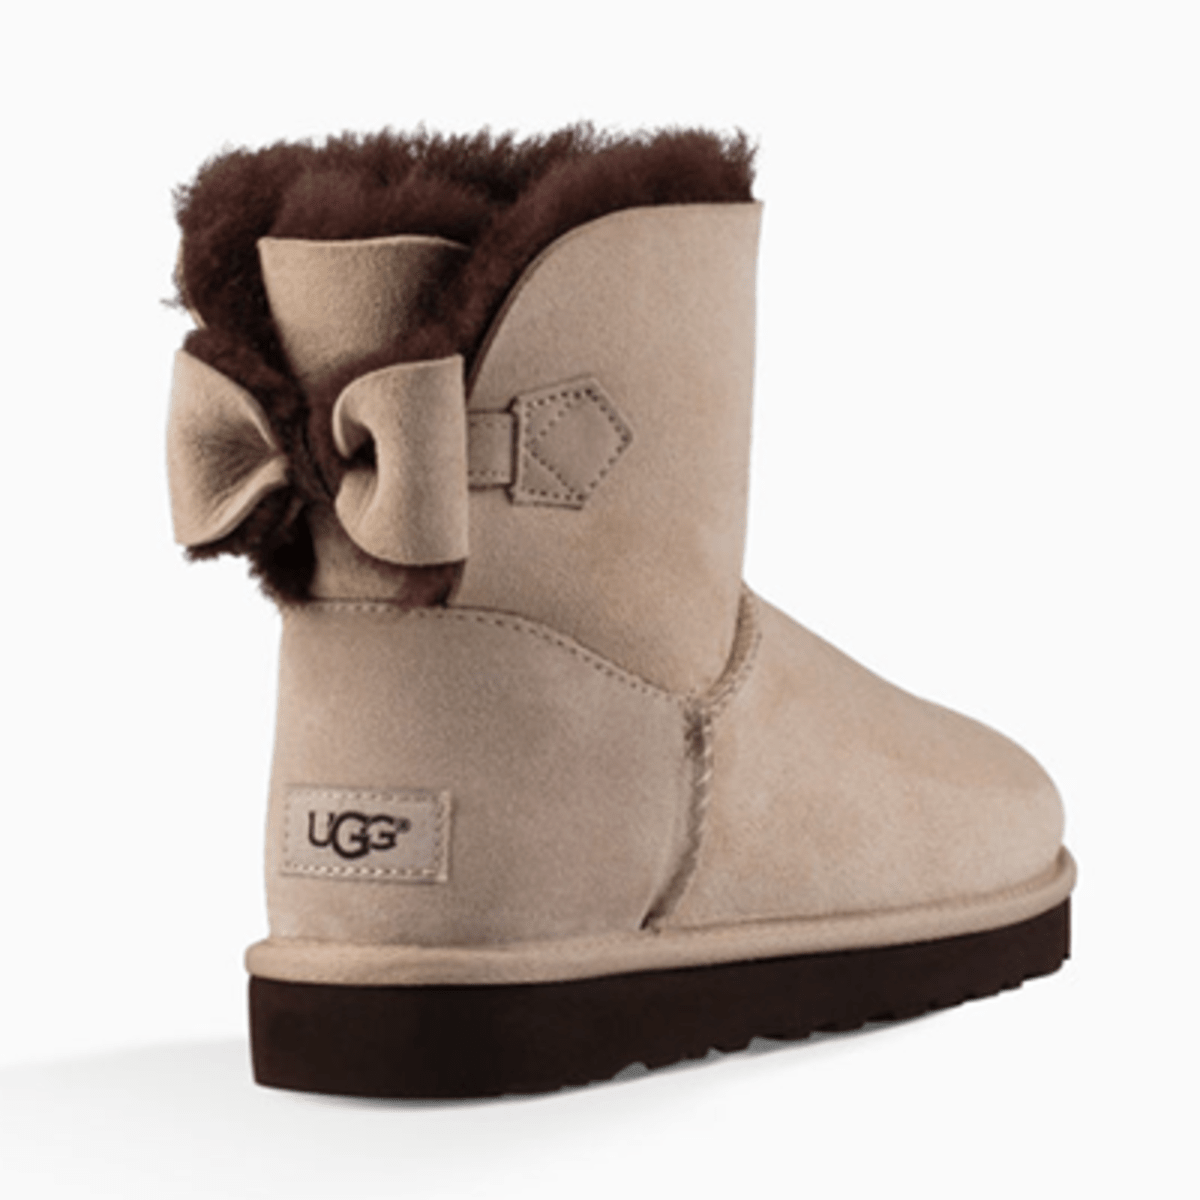 Everyone Went Crazy for Ugg Boots This 